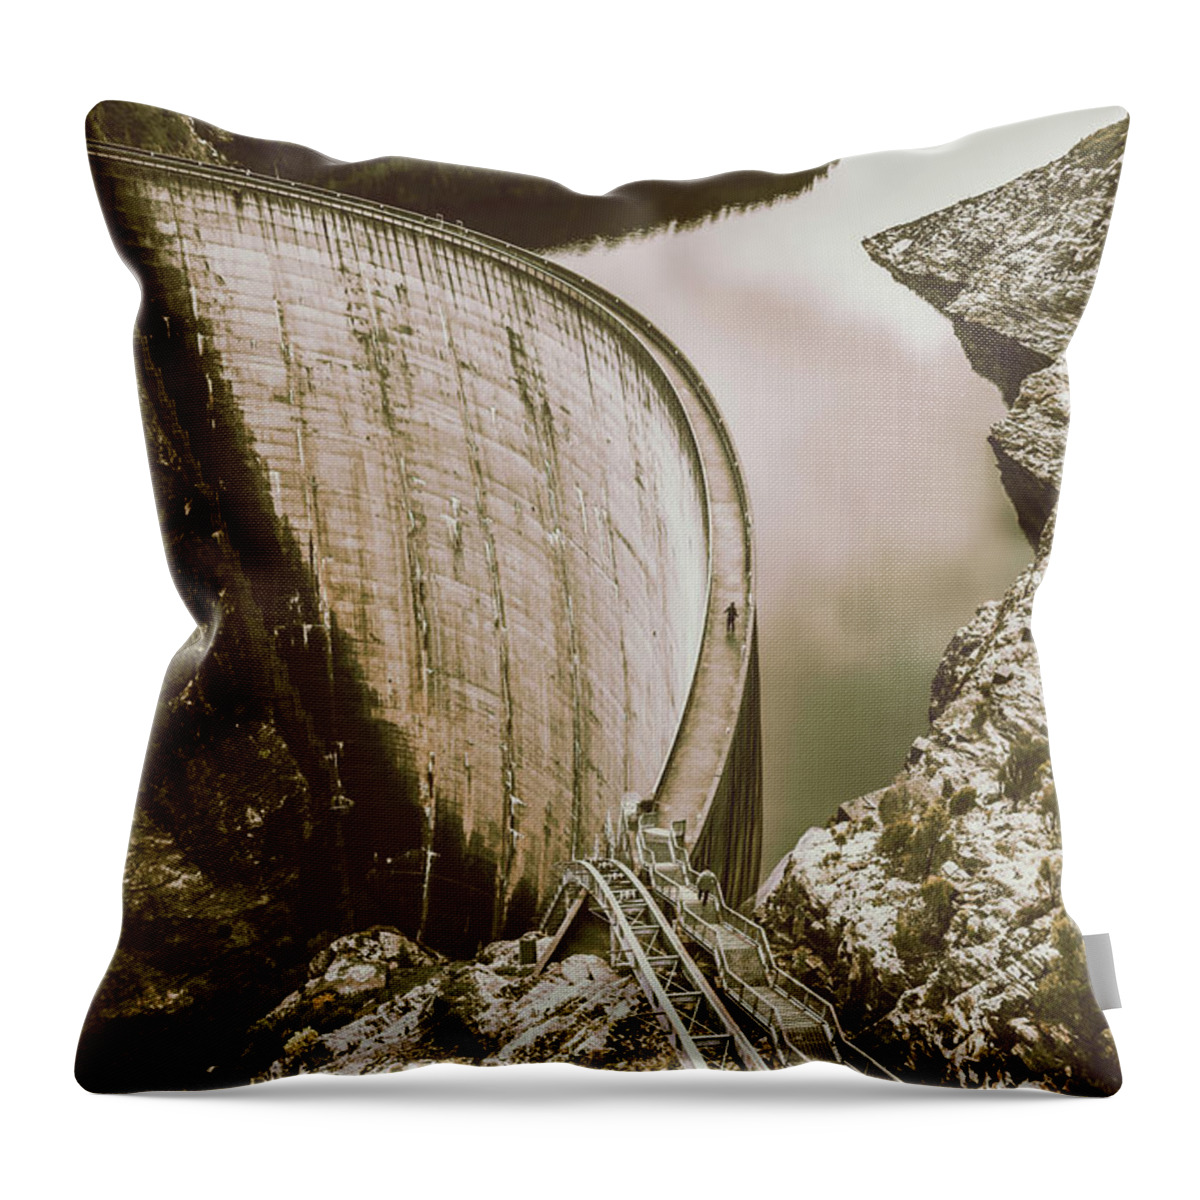 Architecture Throw Pillow featuring the photograph Vintage Hydro-Electric Dam by Jorgo Photography